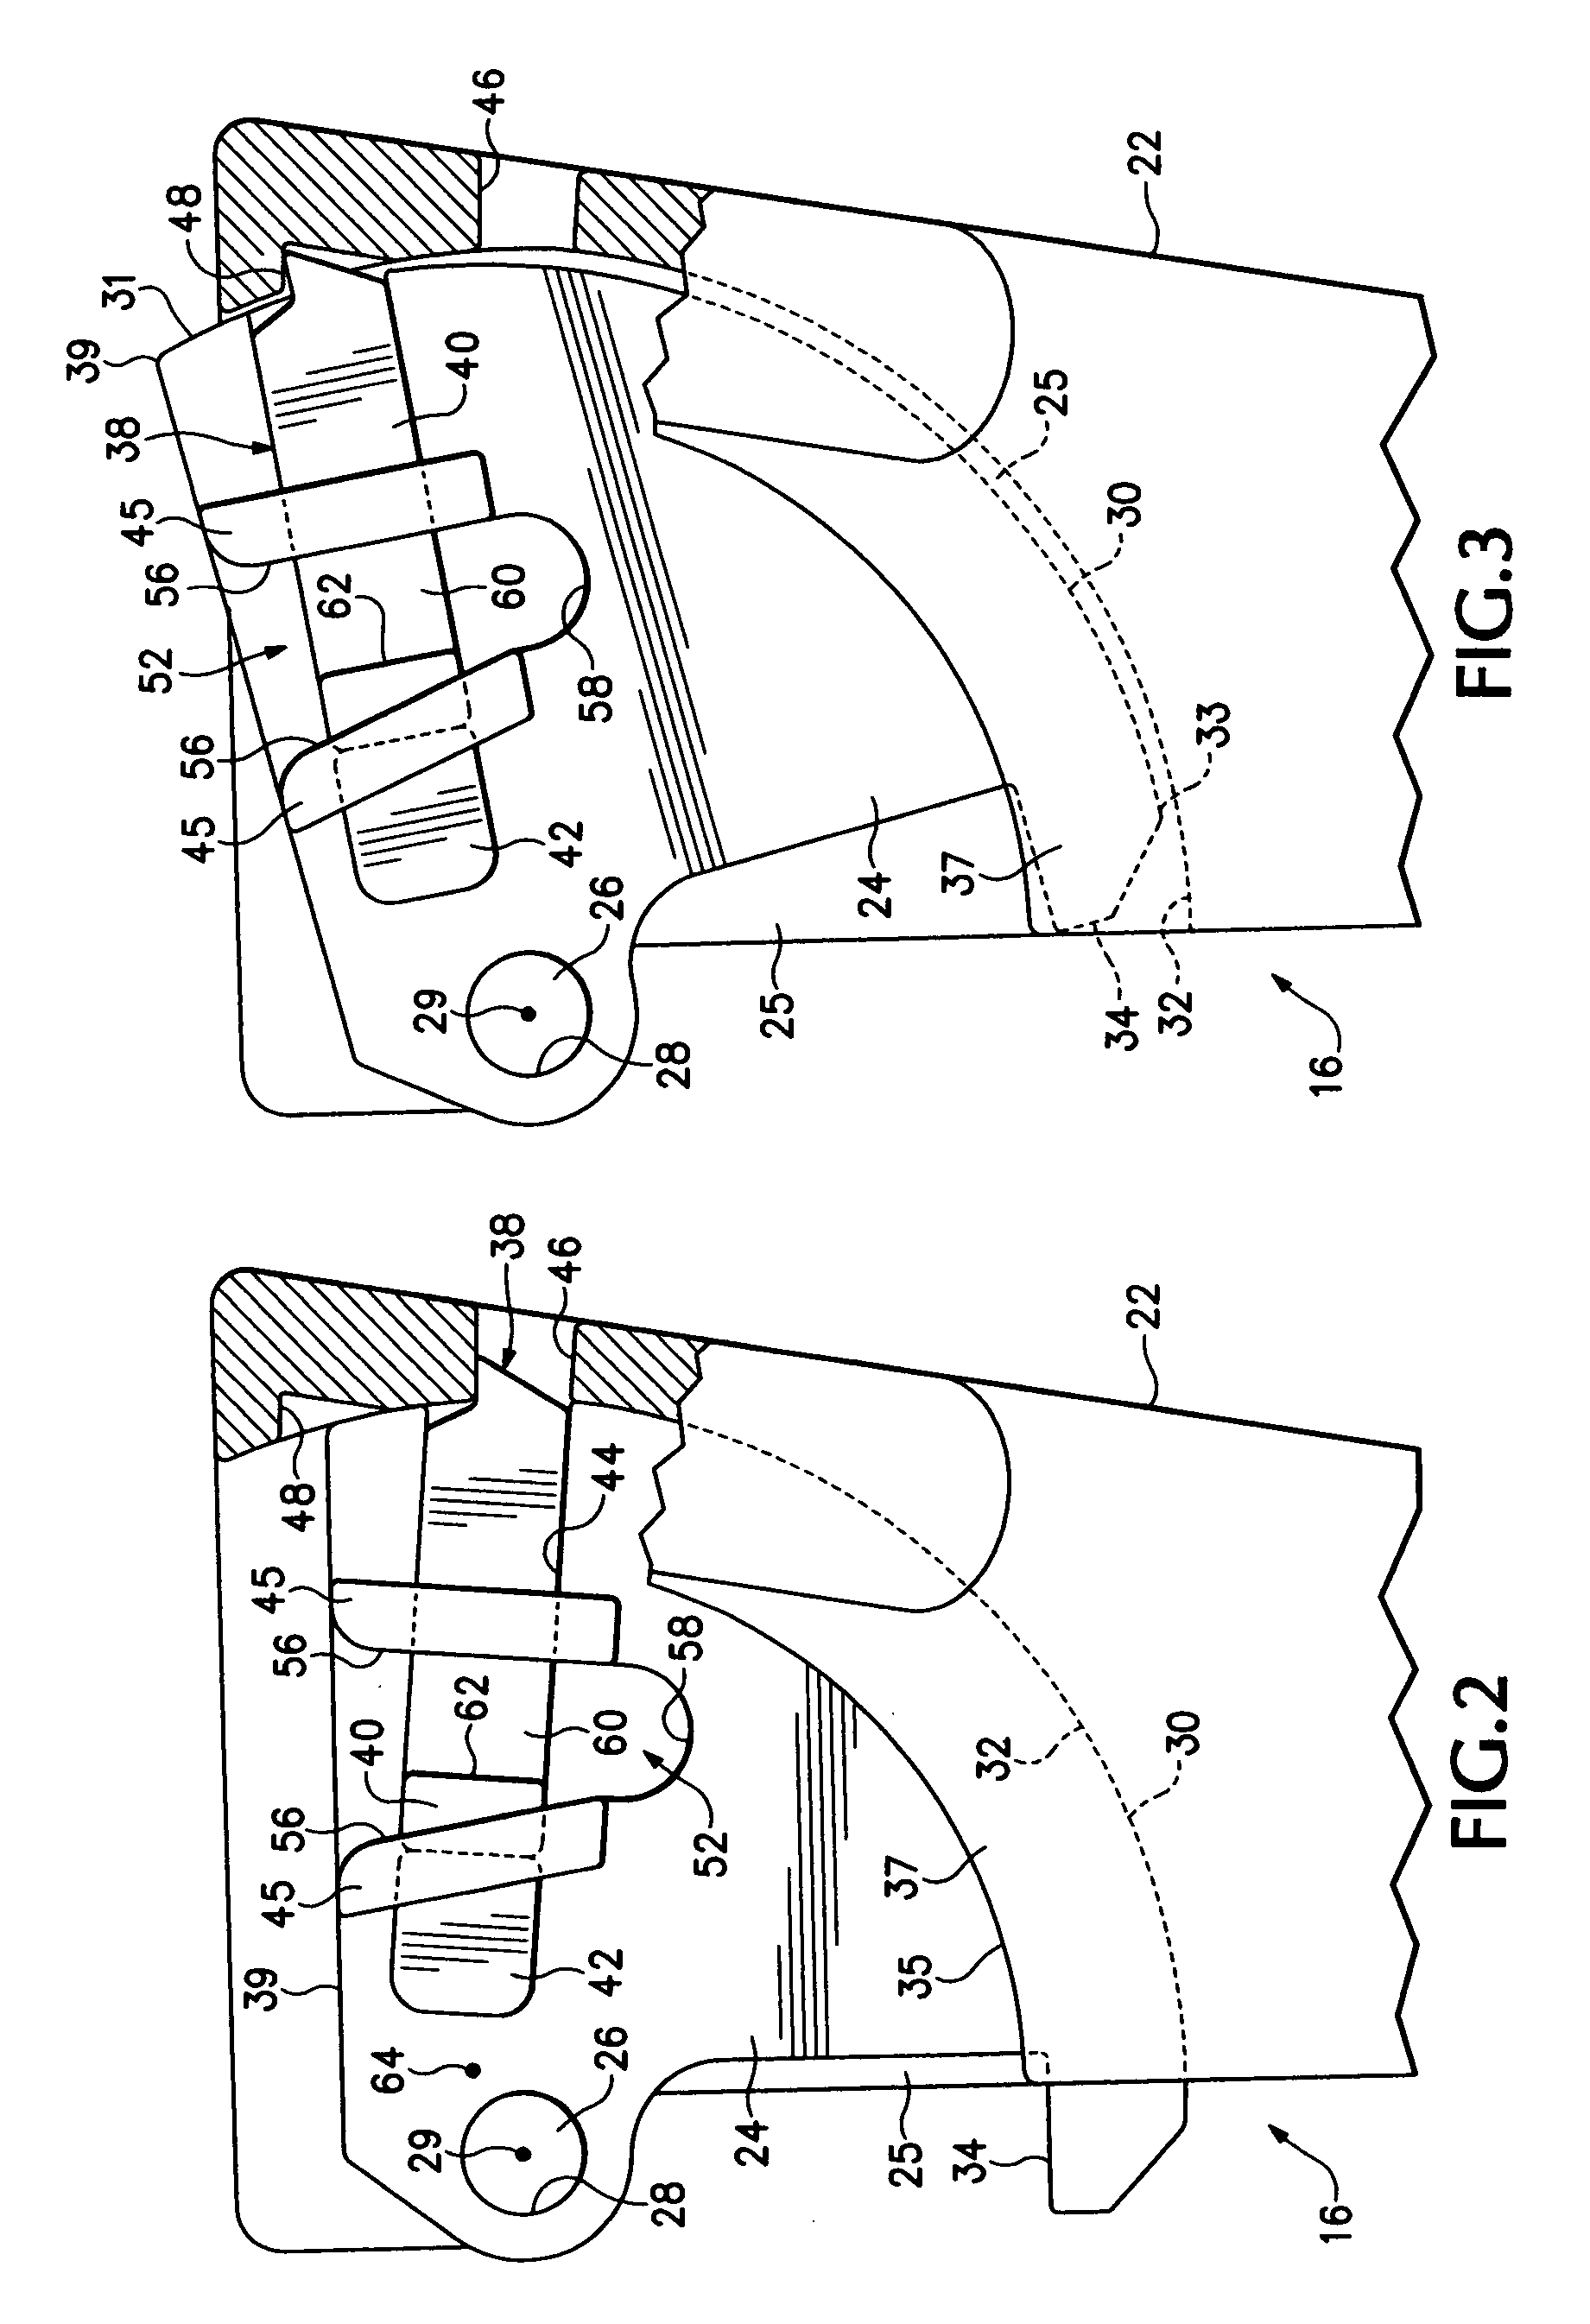 Lock assembly for securing a wear member to earth-working equipment